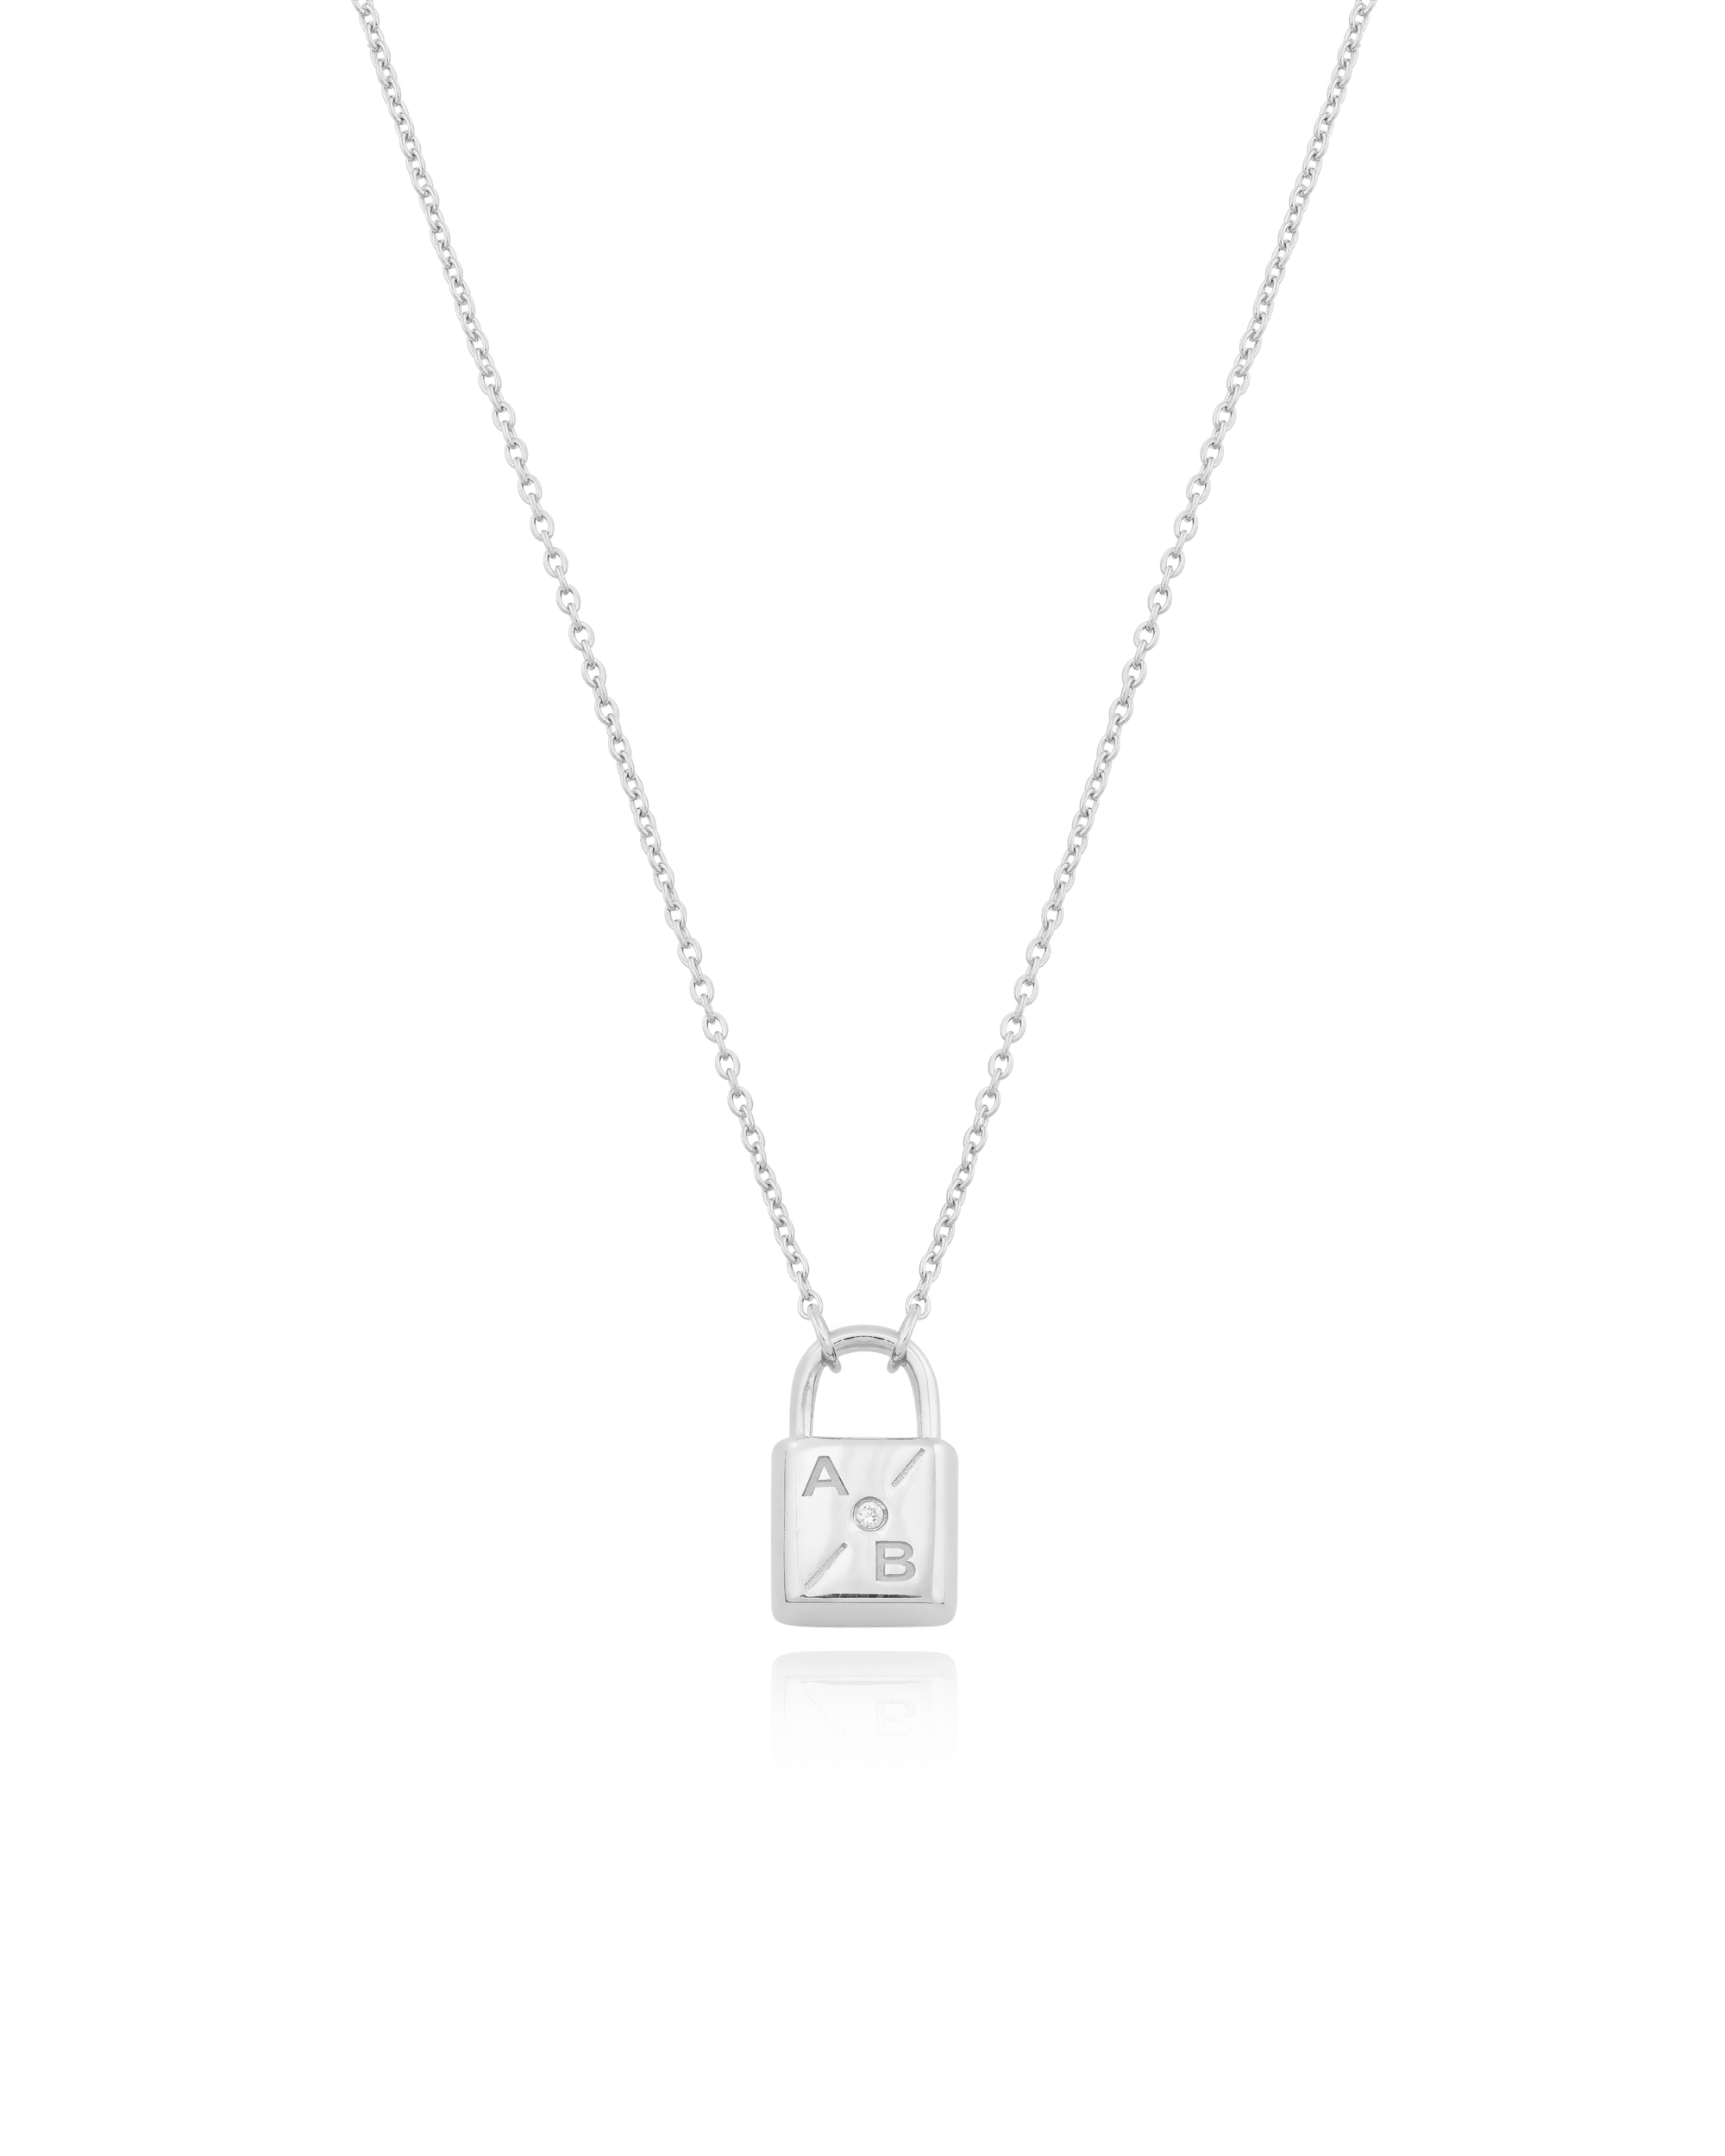 Buy Sterling Silver Key Necklace, Sterling Lock Pendant, Silver Lock and  Key Necklace, Sterling Silver, Lock and Key Pendant, Key Pendant, Gift  Online in India - Etsy